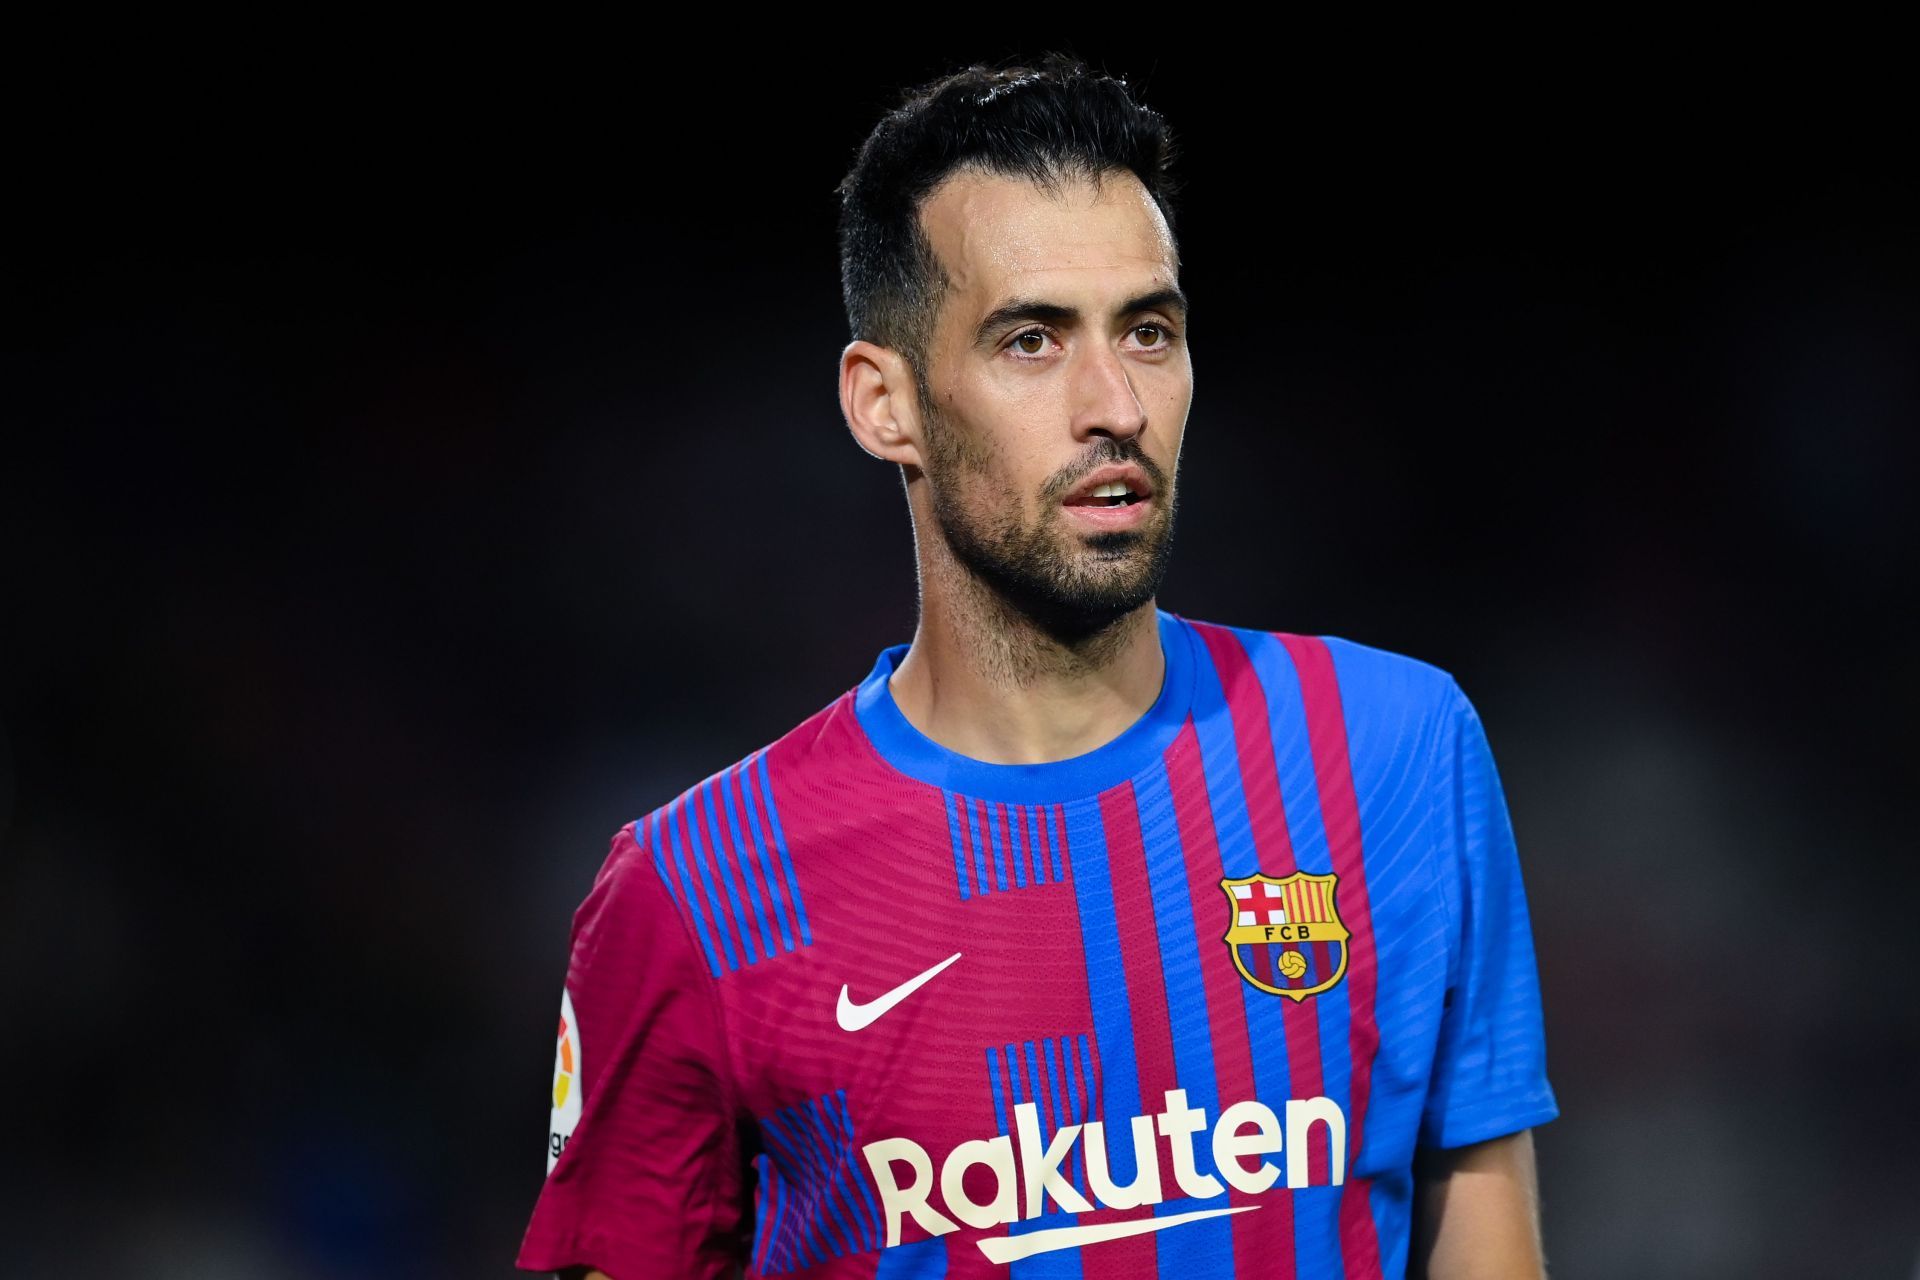 Busquets has over 670 appearances (across all competitions) for Barcelona